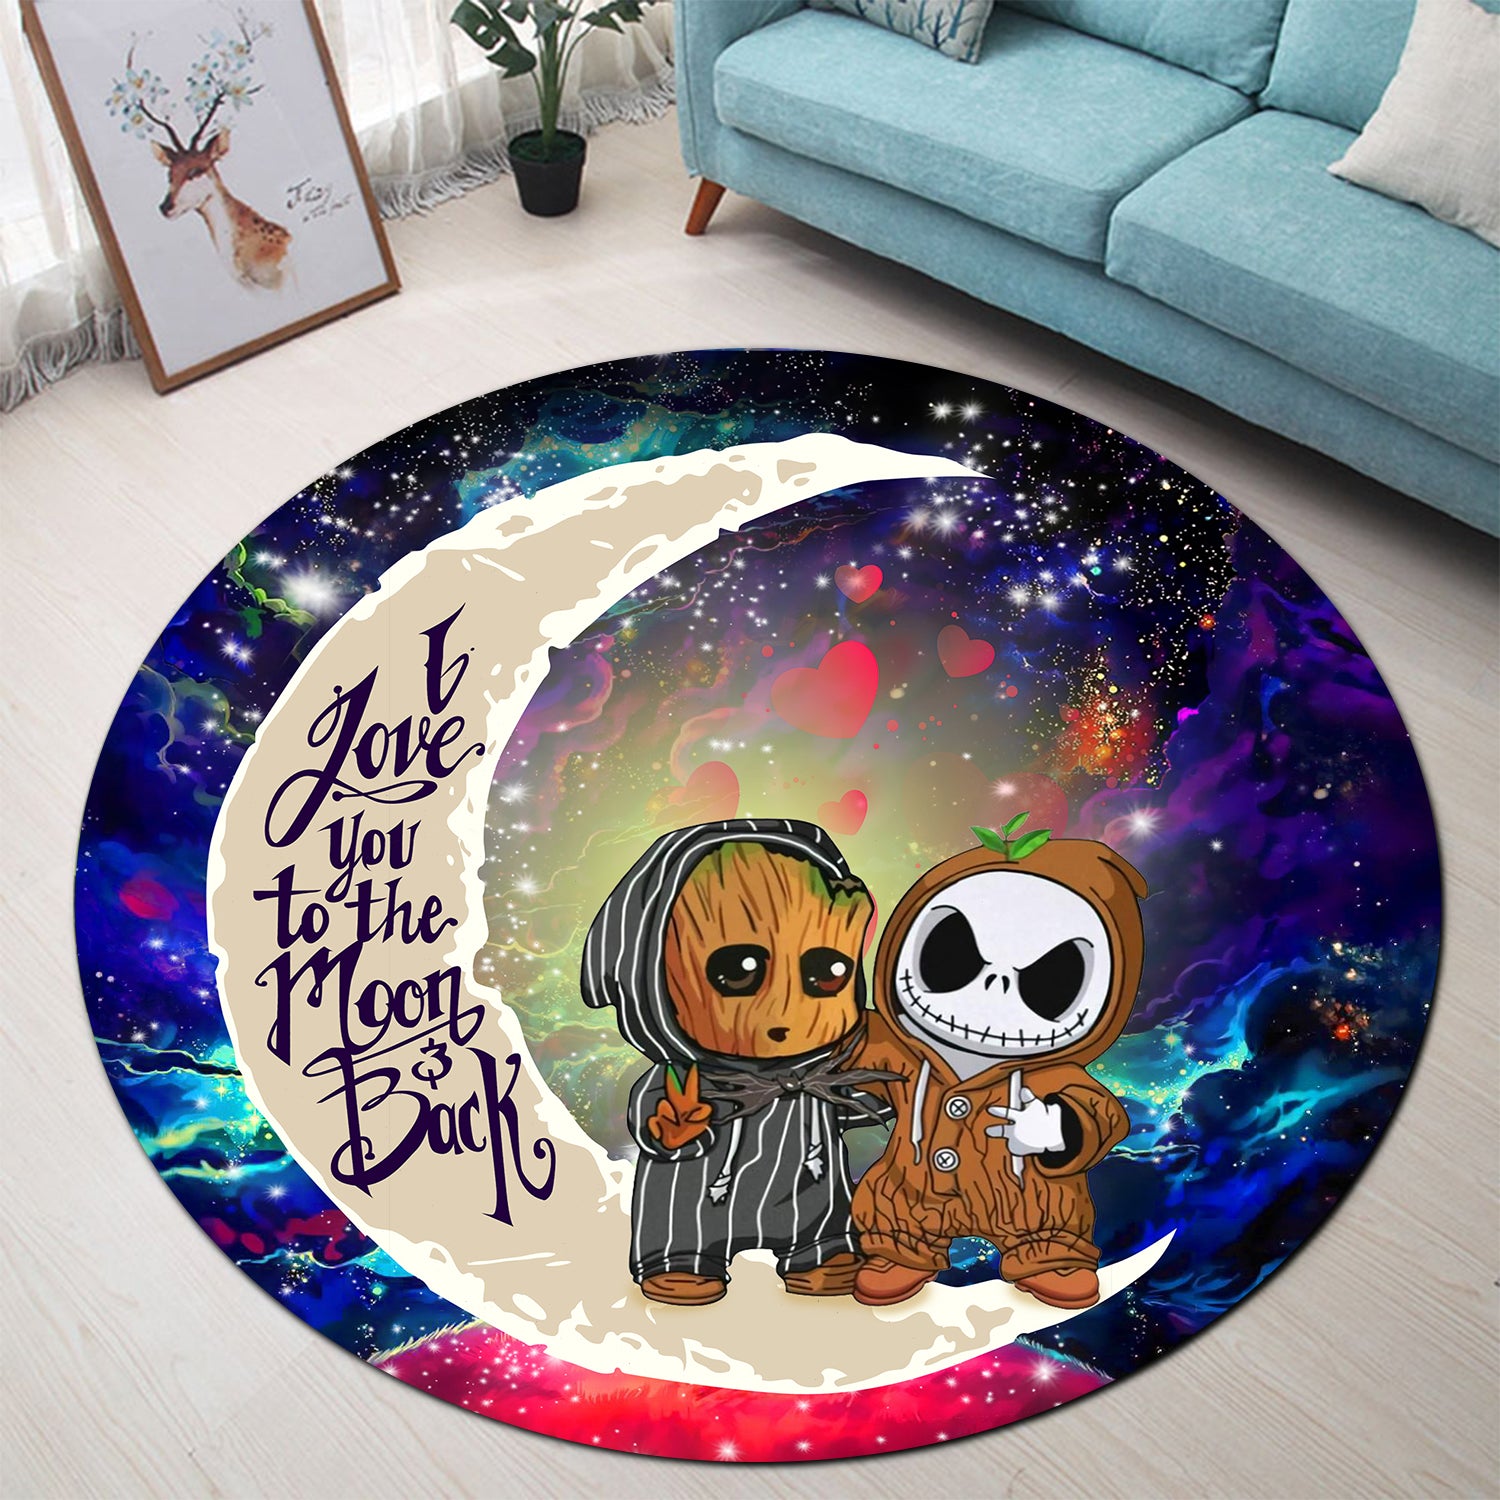 Cute Baby Groot And Jack Nightmare Before Christmas Love You To The Moon Galaxy Round Carpet Rug Bedroom Livingroom Home Decor Nearkii